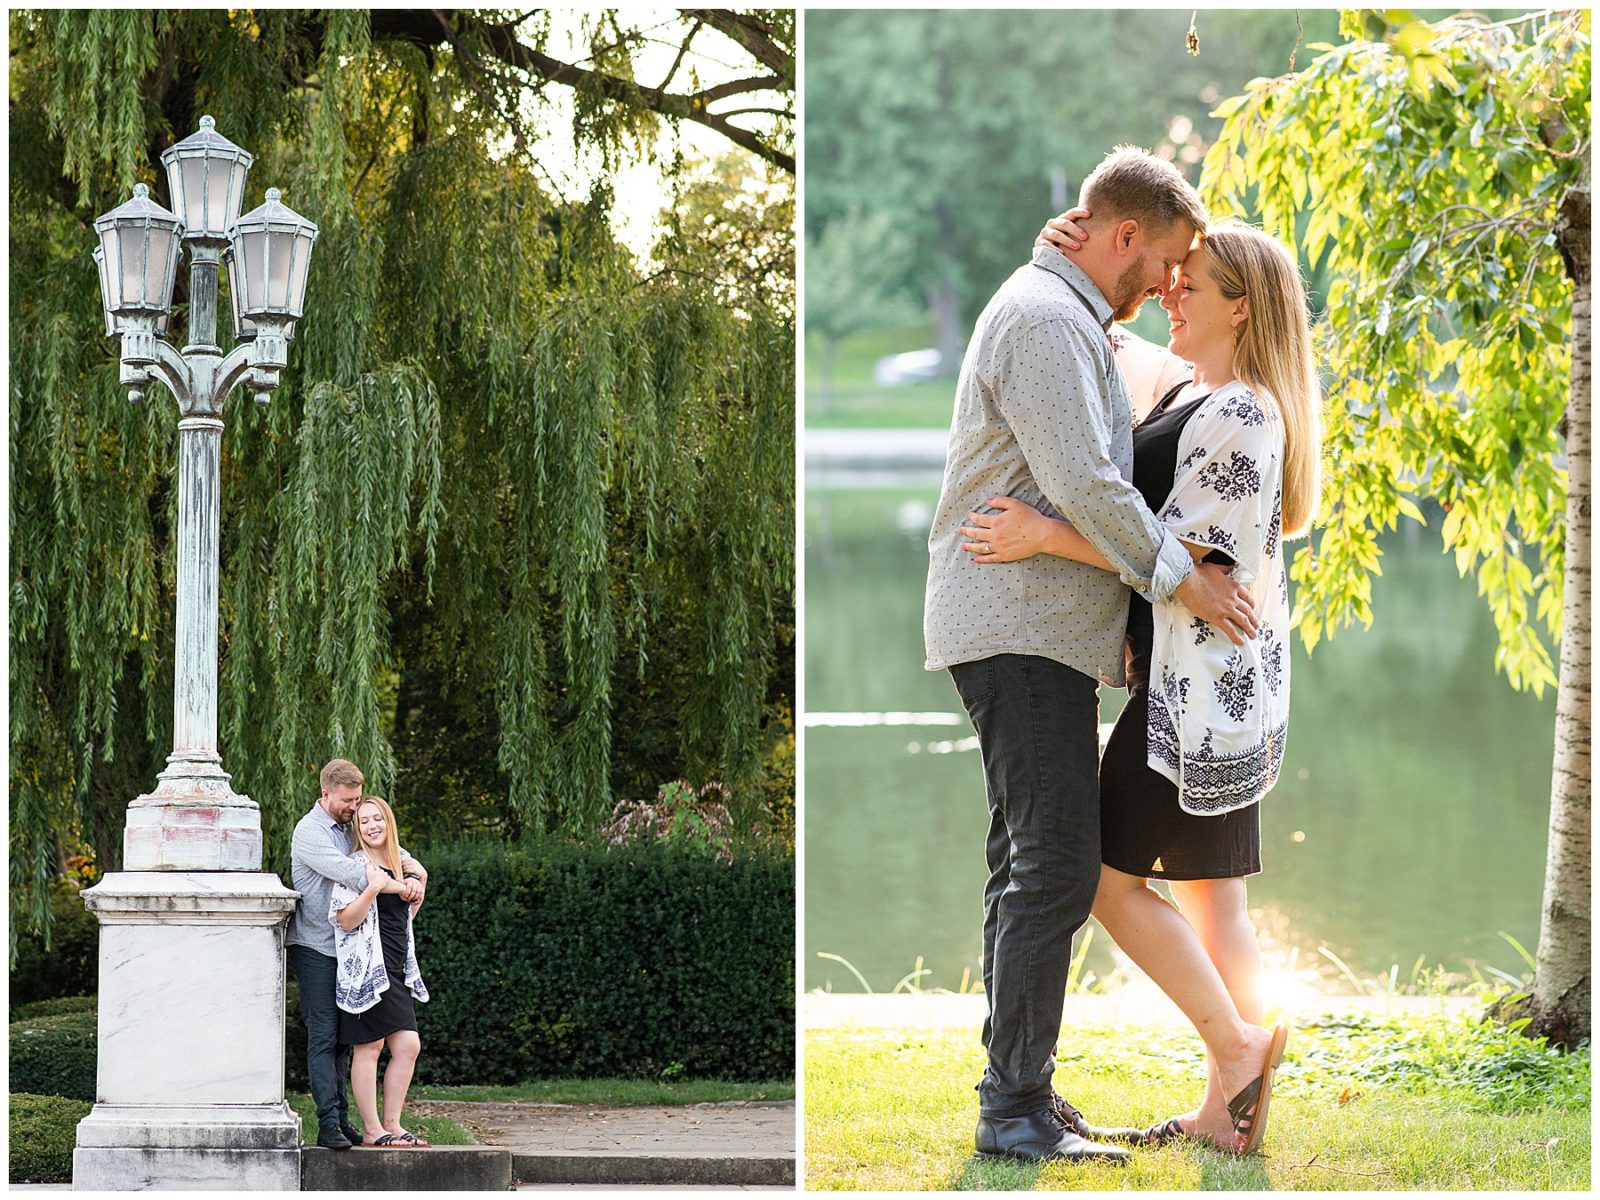 A Cleveland engagement session, wade lagoon photos, summer photos, sweet and candid photos, romantic engagement photos, outfit ideas, soft floral dress, willow tree, light post photos